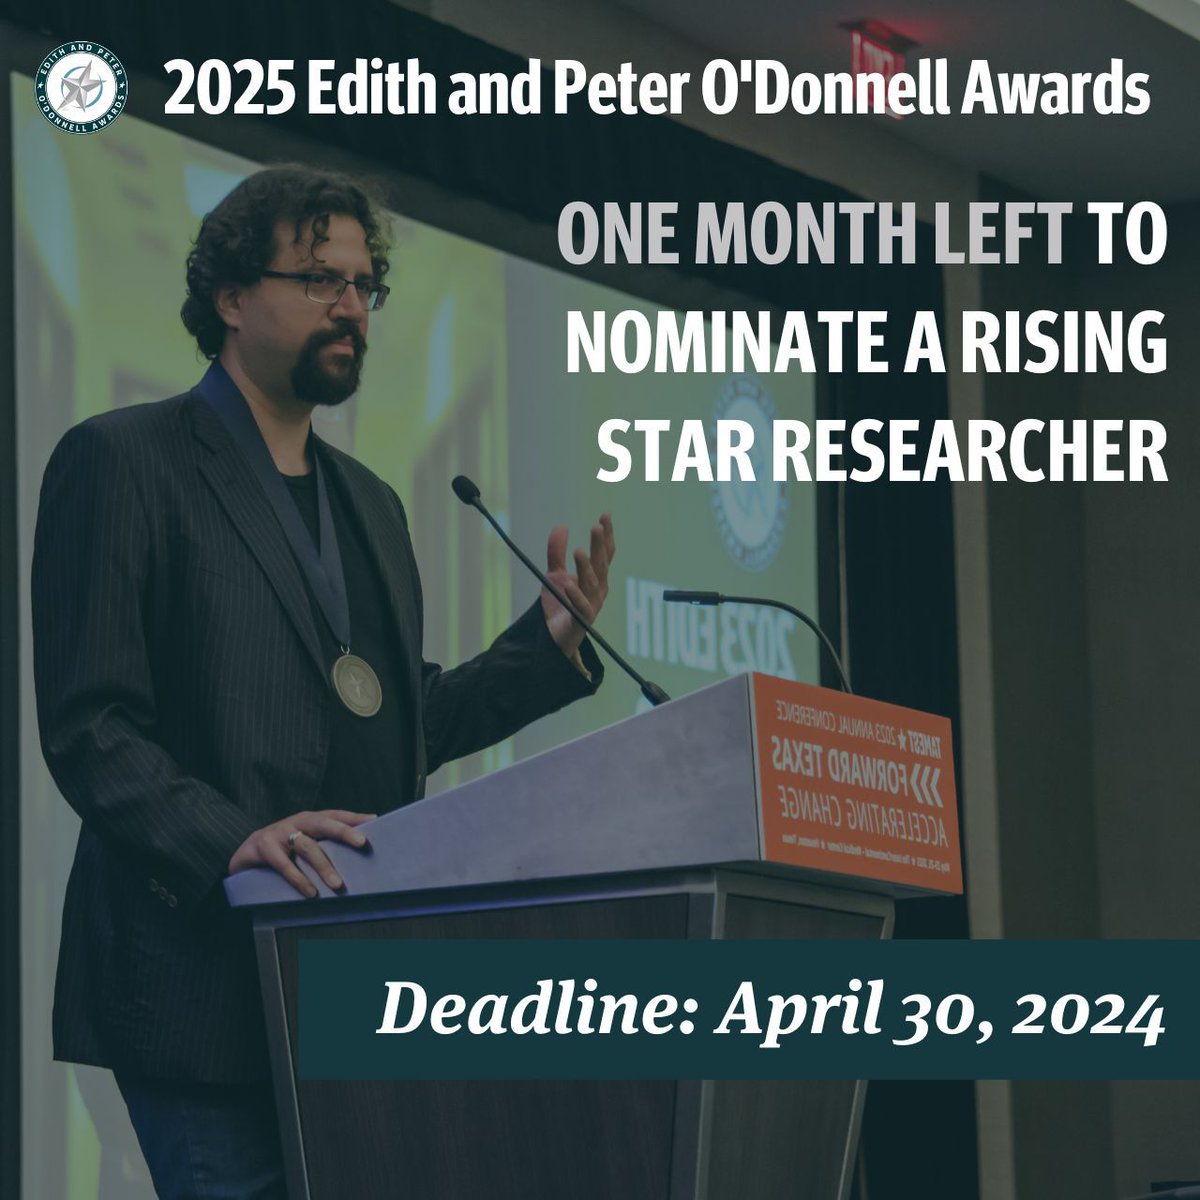 There is only one month left to nominate for the 2025 Edith and Peter O’Donnell Awards. Don’t miss this opportunity to recognize the outstanding achievements of a rising star Texas researcher today. Learn More: buff.ly/3KrHQ7E